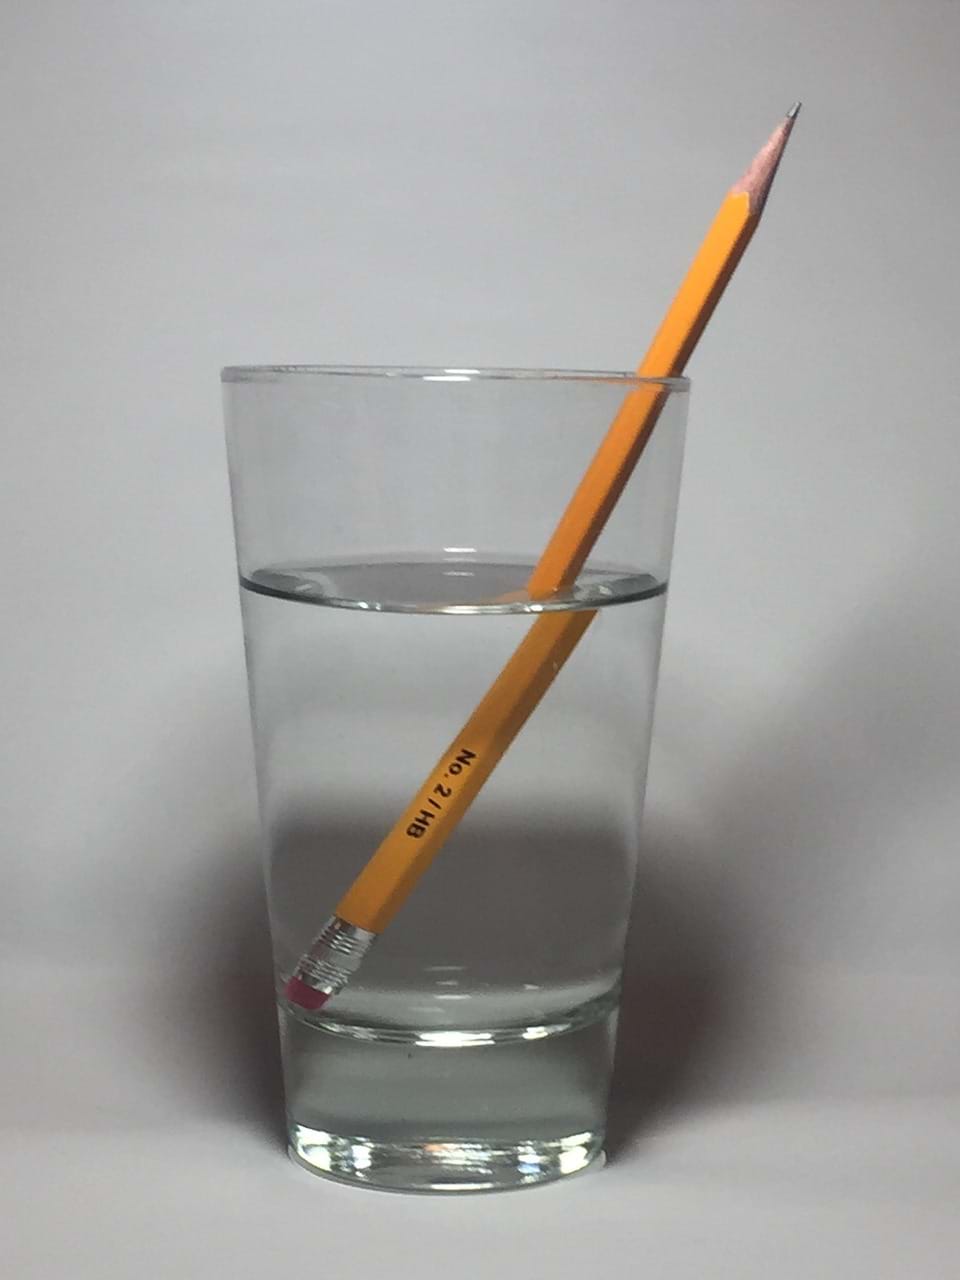 Photo of a pencil in a glass of water. The pencil image is refracted at the point where the pencil enters the water.